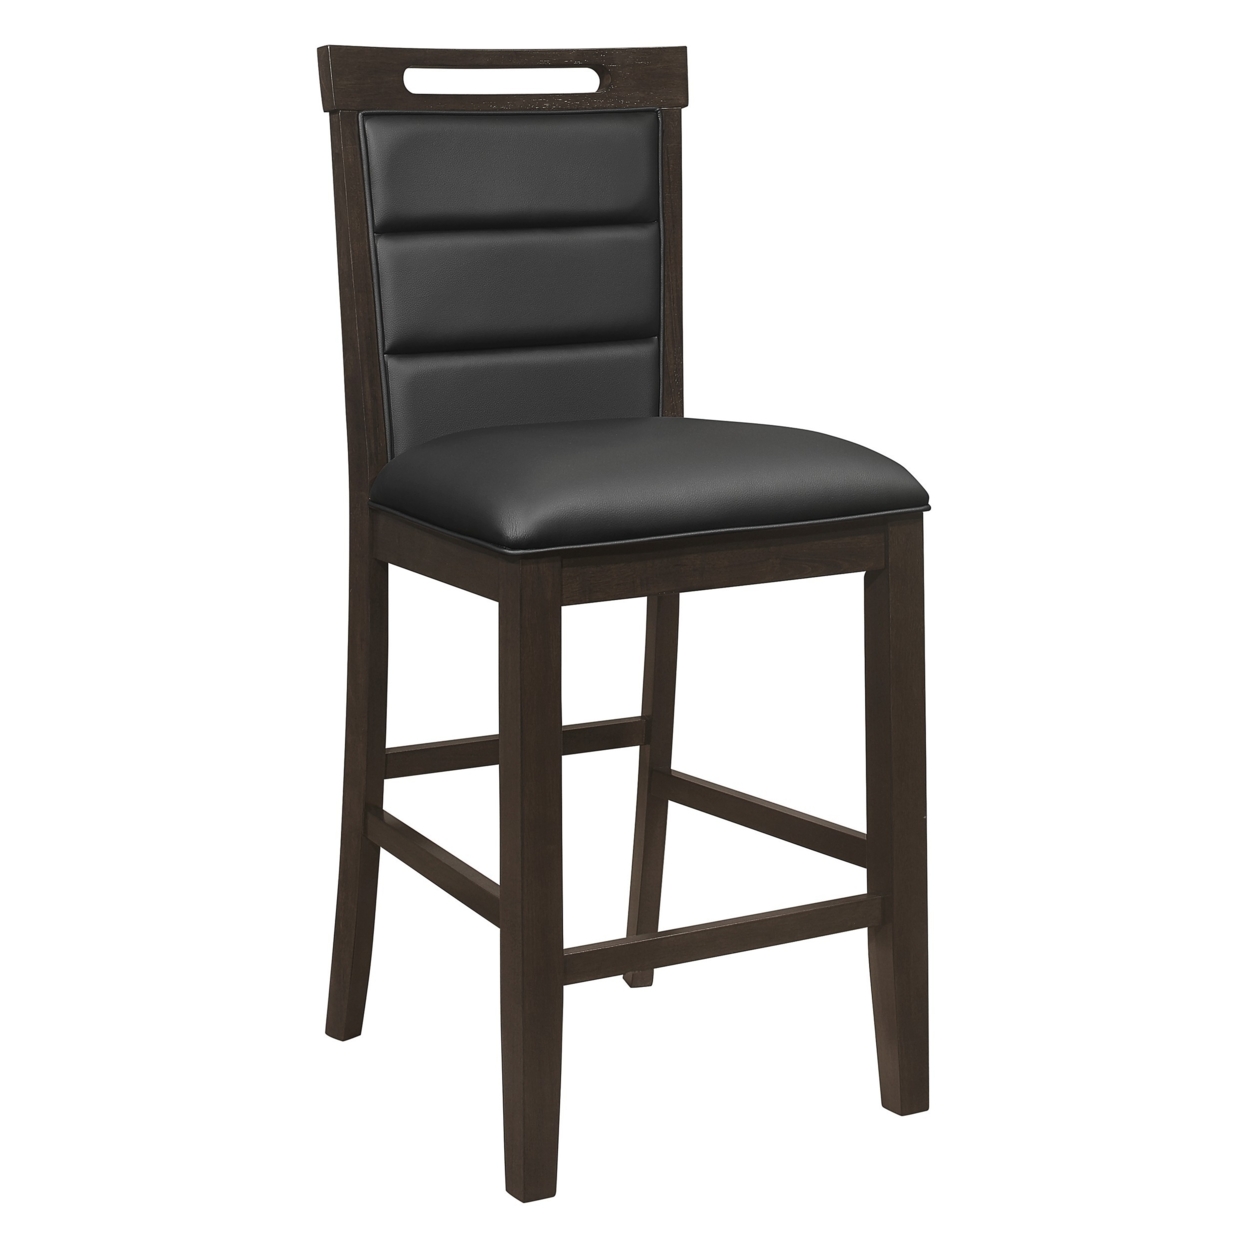 27 Inch Counter Stool Chair, Set Of 2, Black Faux Leather, Tufted Cushions- Saltoro Sherpi